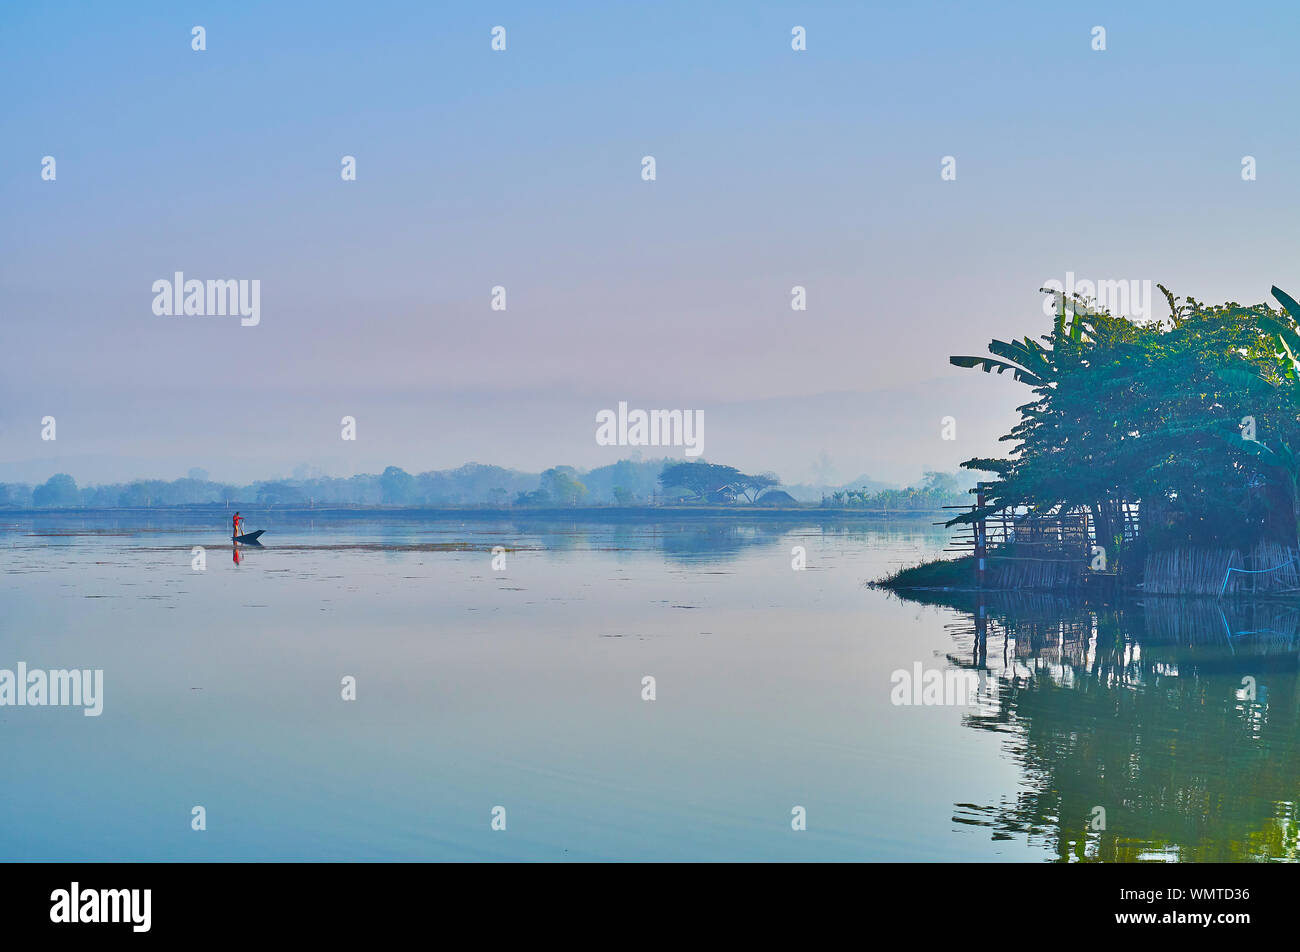 The clear surface of Tharzi pond reflects the hazy dawn sky, traditional Burmese fisherman in kayak is seen on background, Nyaungshwe, Myanmar. Stock Photo